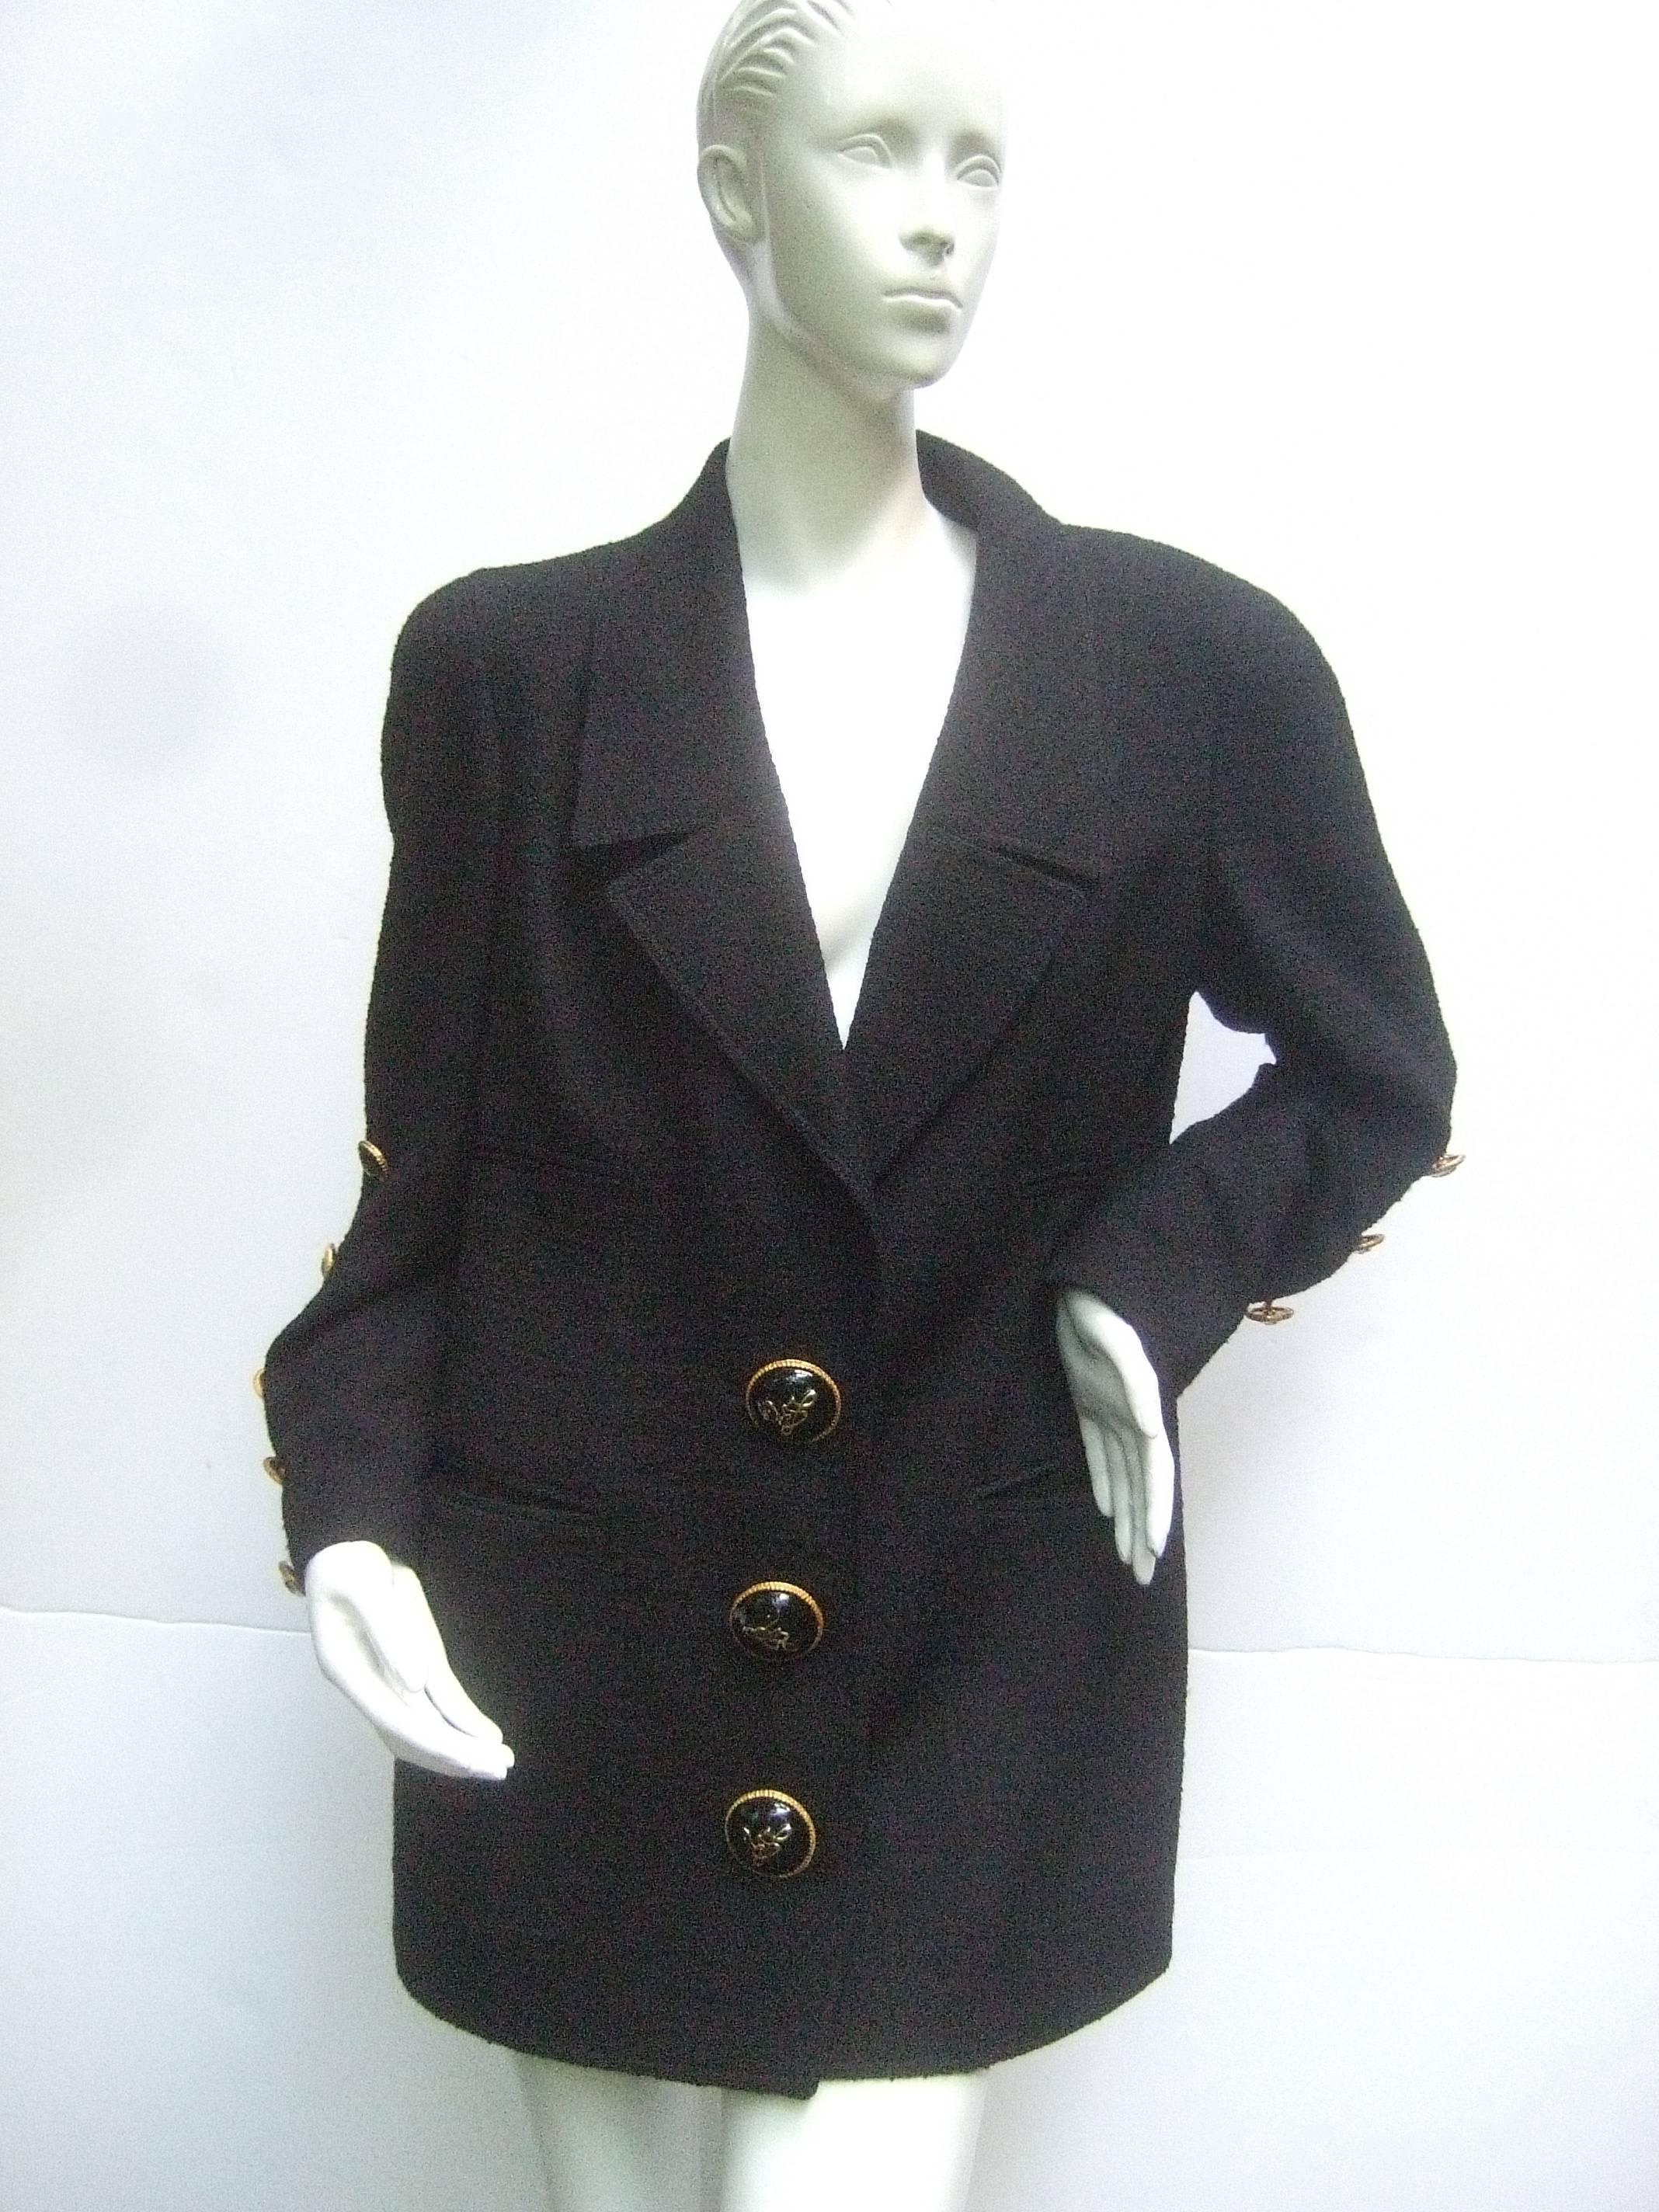 Liliane Romi Couture Paris Black Boucle Wool Jacket c 1990s In Excellent Condition For Sale In University City, MO